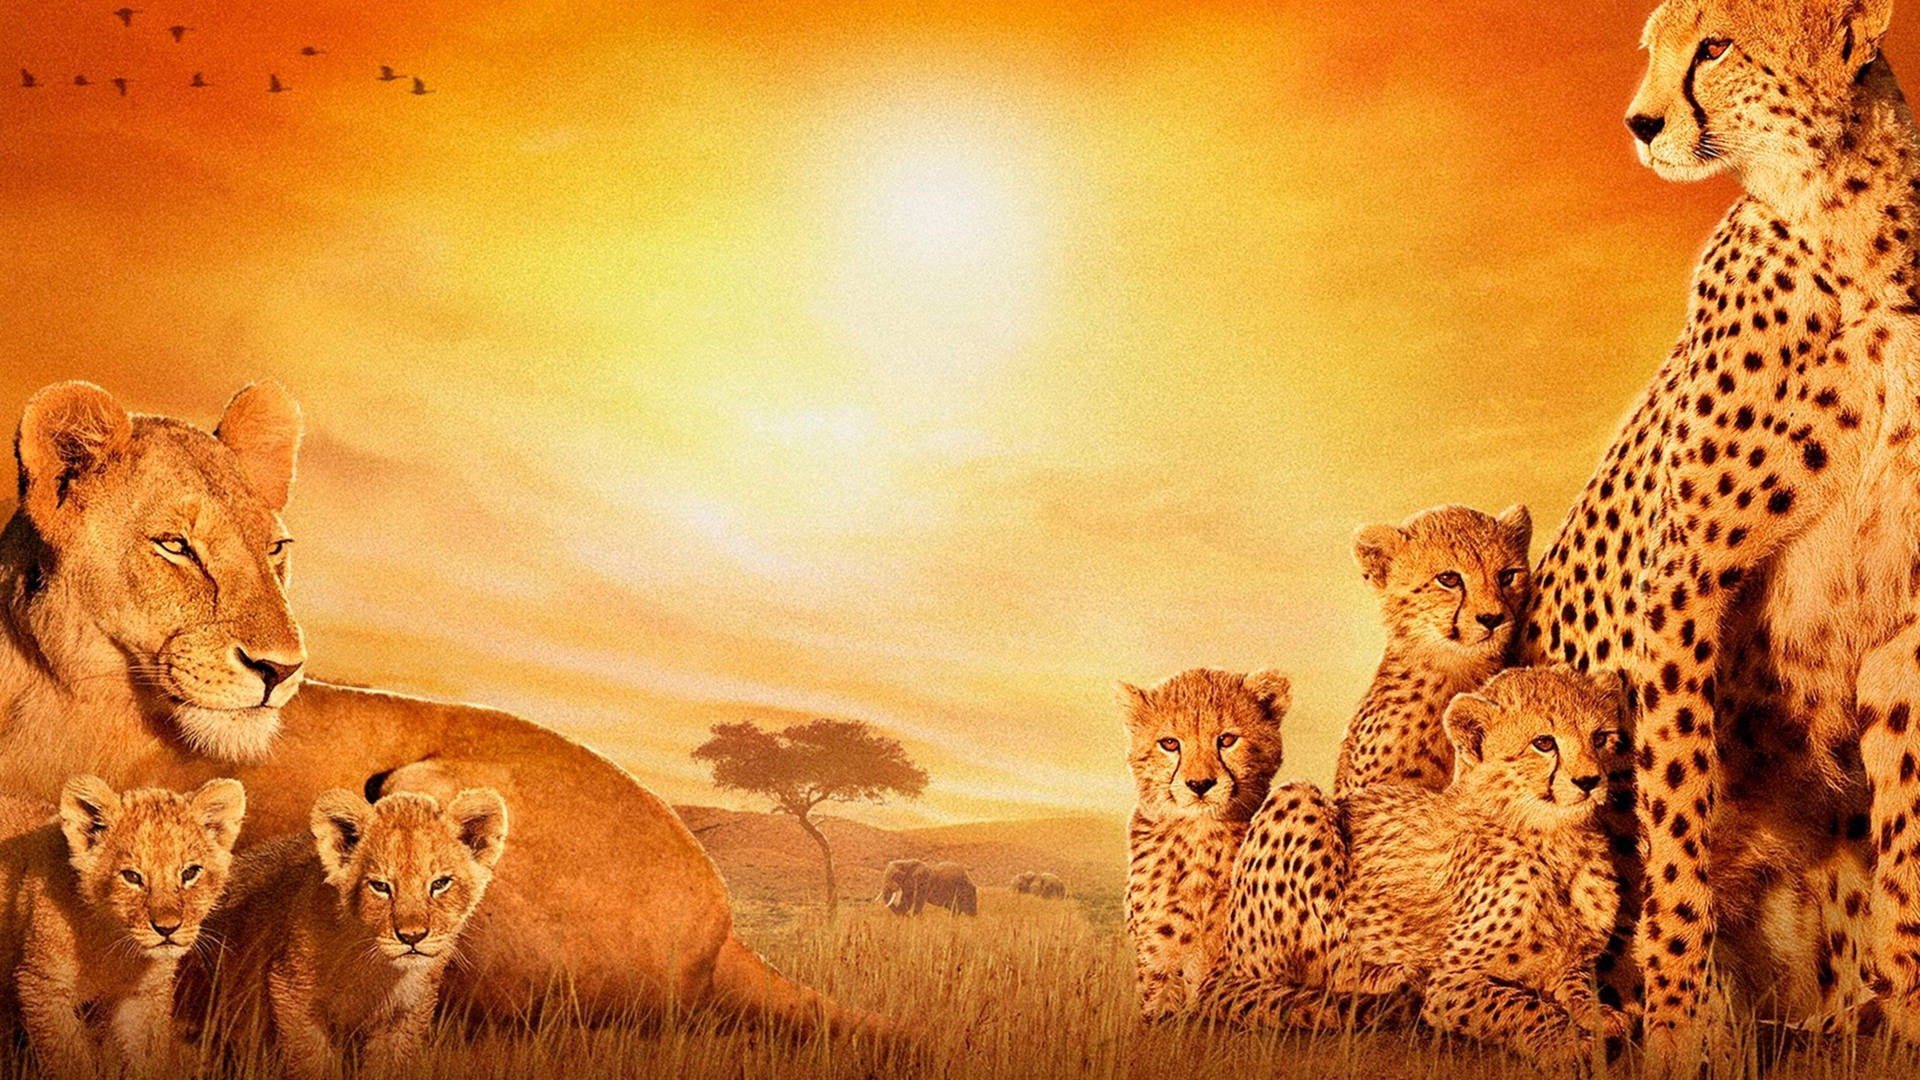 Lions And Cheetahs In Africa Background